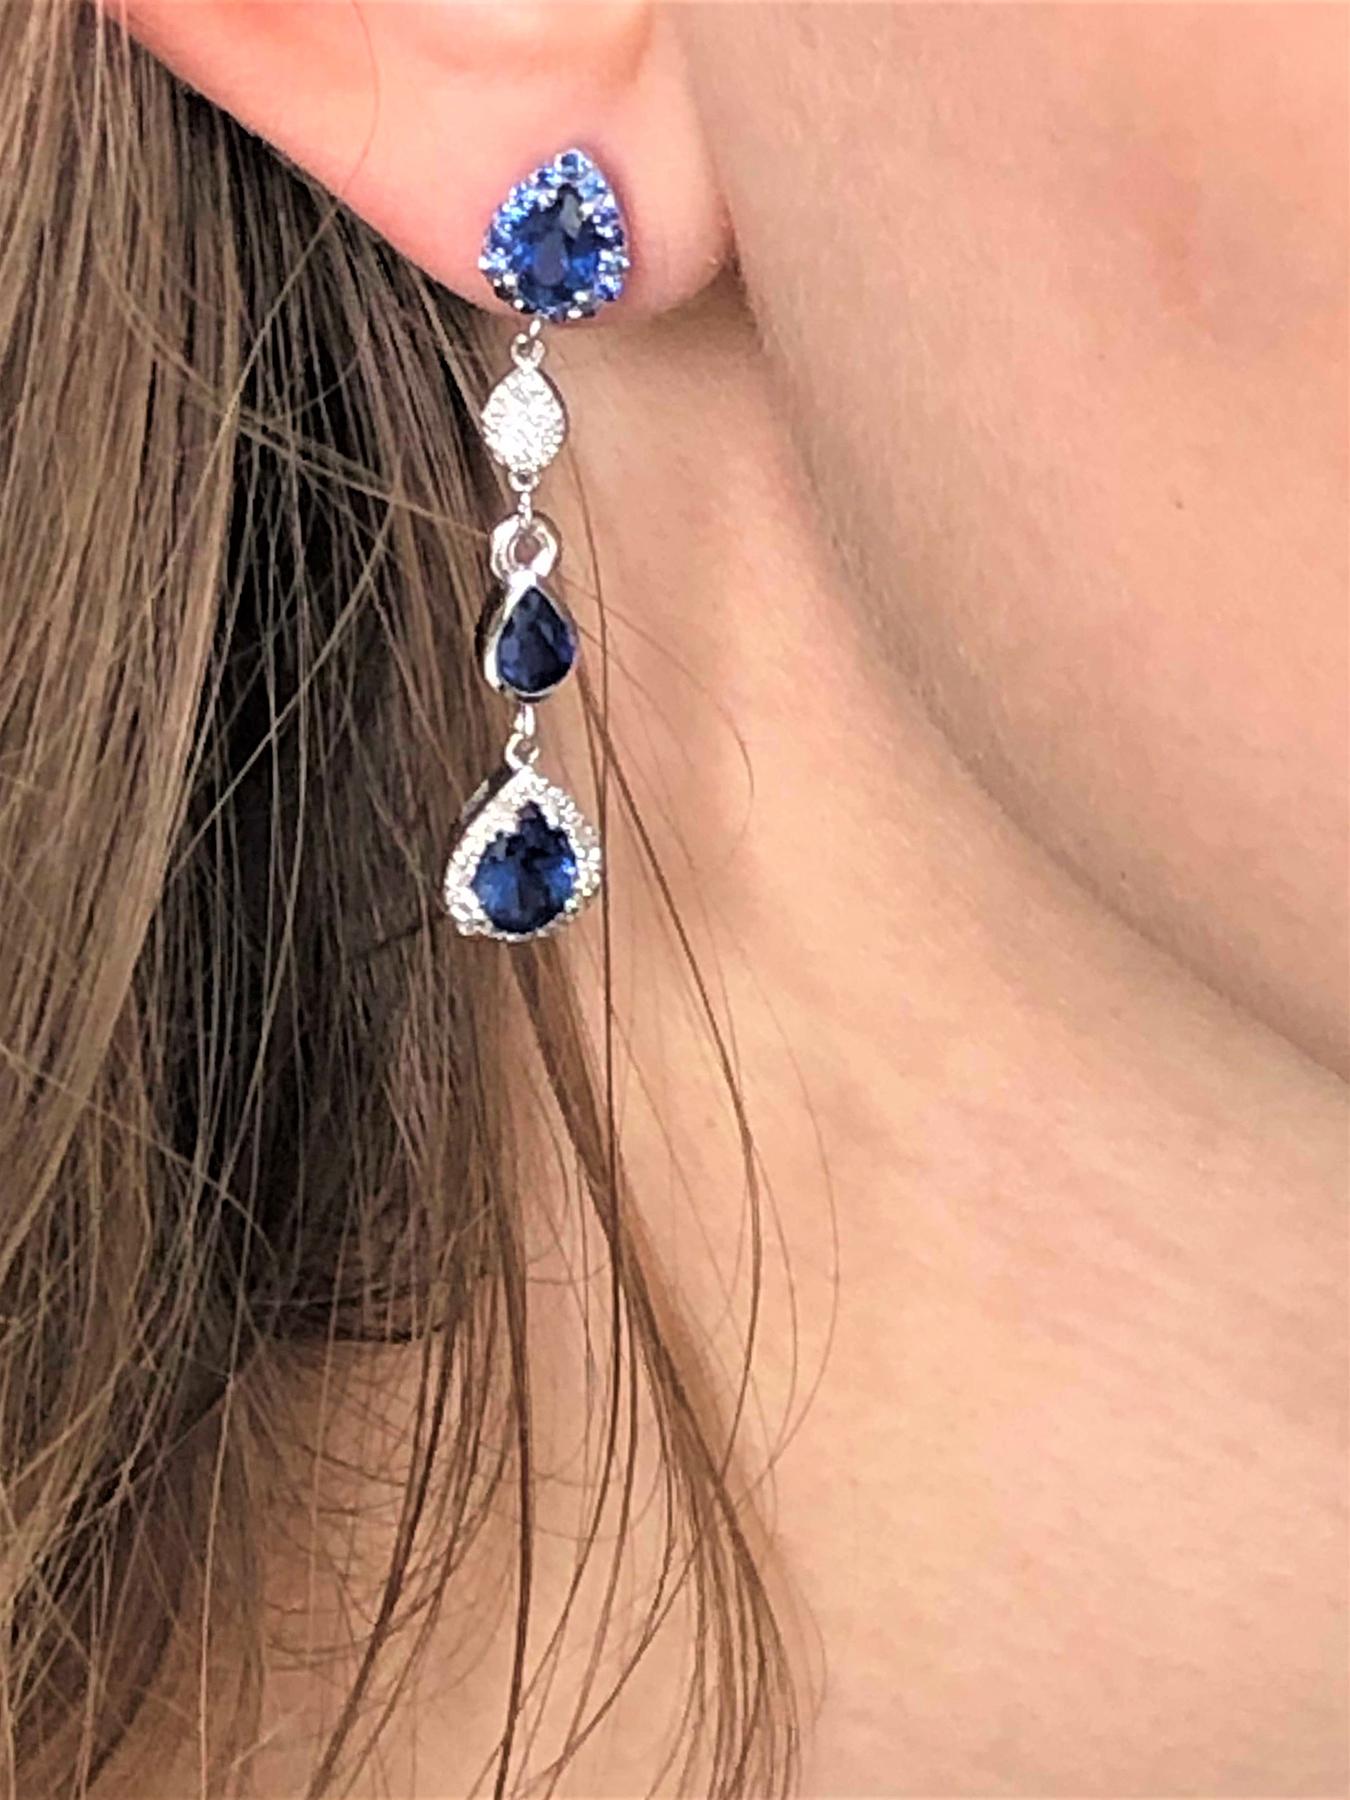 14 karat white gold drop earrings two inch long
Diamonds weighing 1.25 carat 
Pear shape sapphires weighing 3.65 carat
One of a kind earring
New Earrings
Handmade in the USA
The 14 karat gold earrings are hanging off a post with push backs
Our team